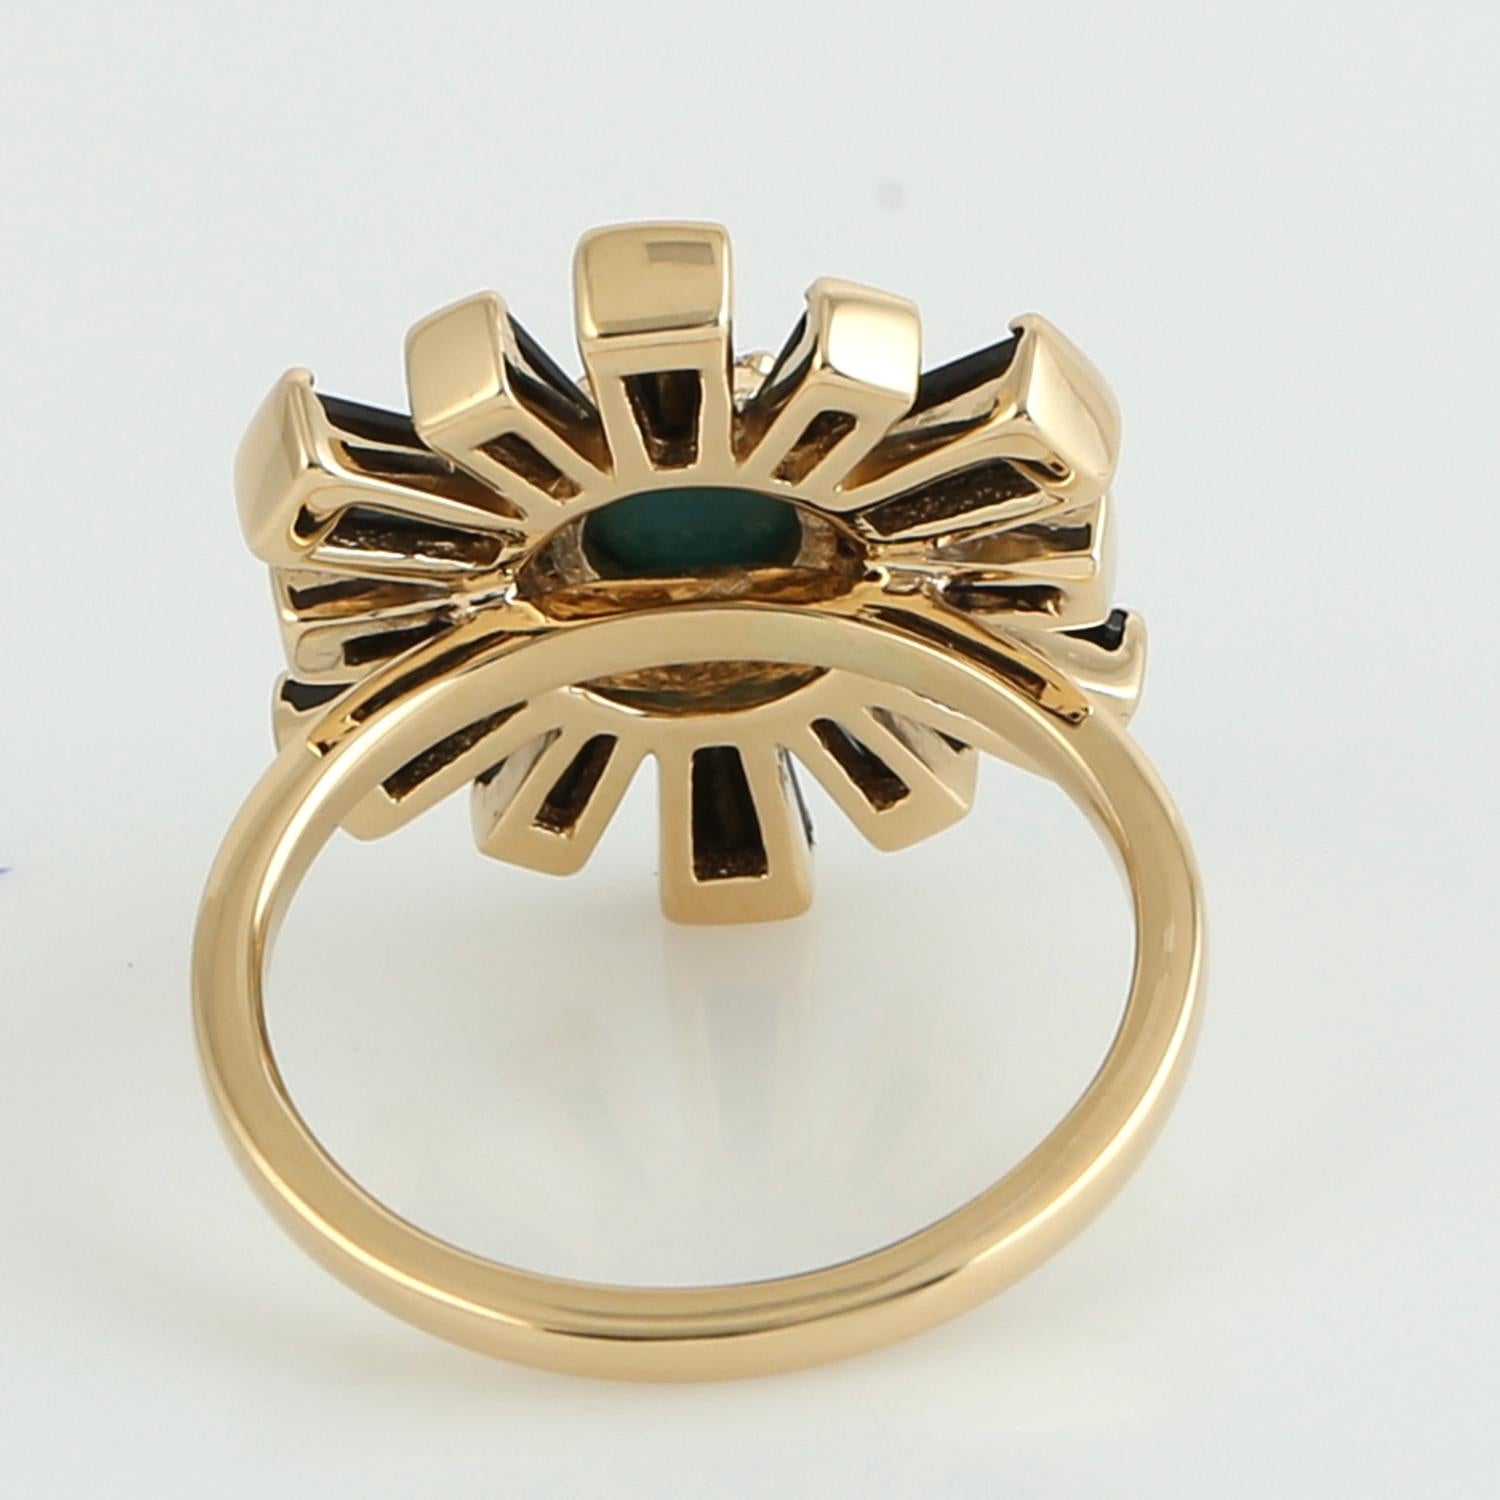 Contemporary Baguette Shaped Spinel Ring With Round Chrysoprase Made in 18K Yellow Gold For Sale